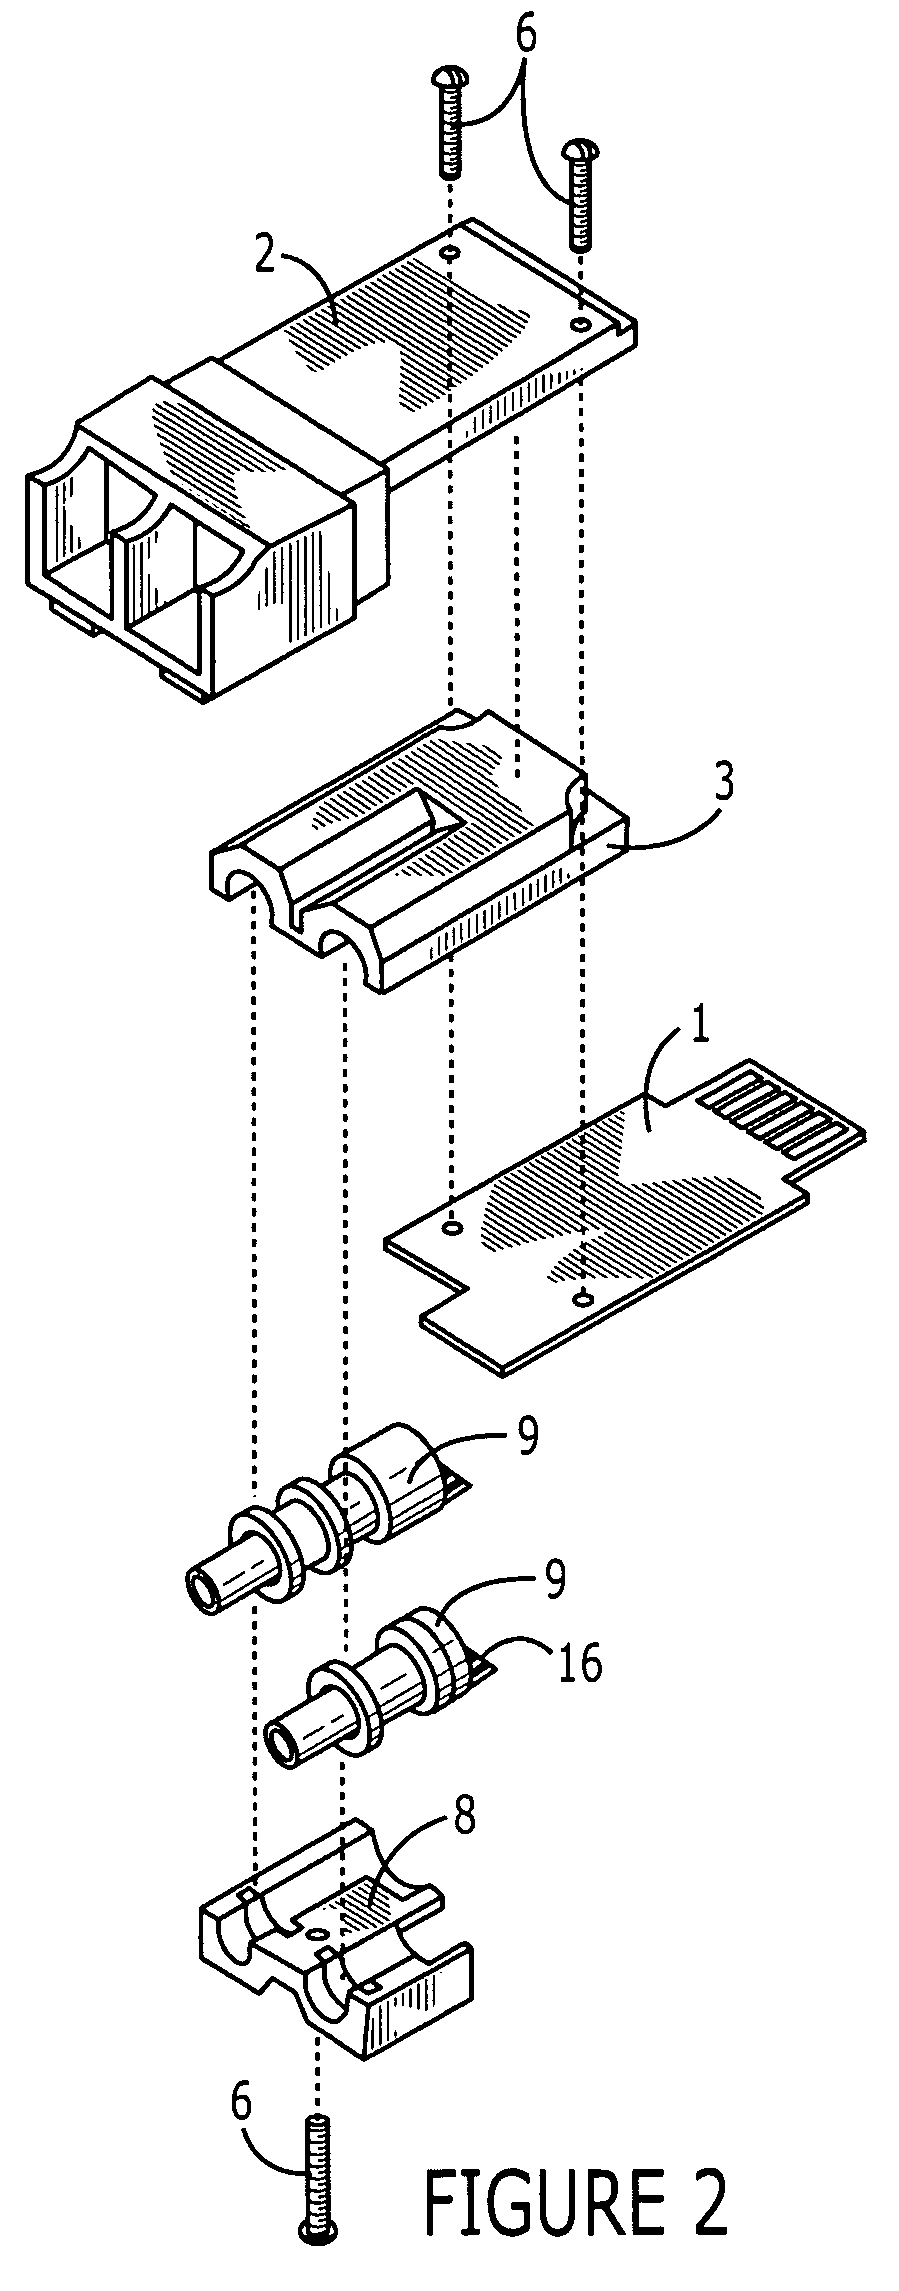 Opto-electric module and method of assembling